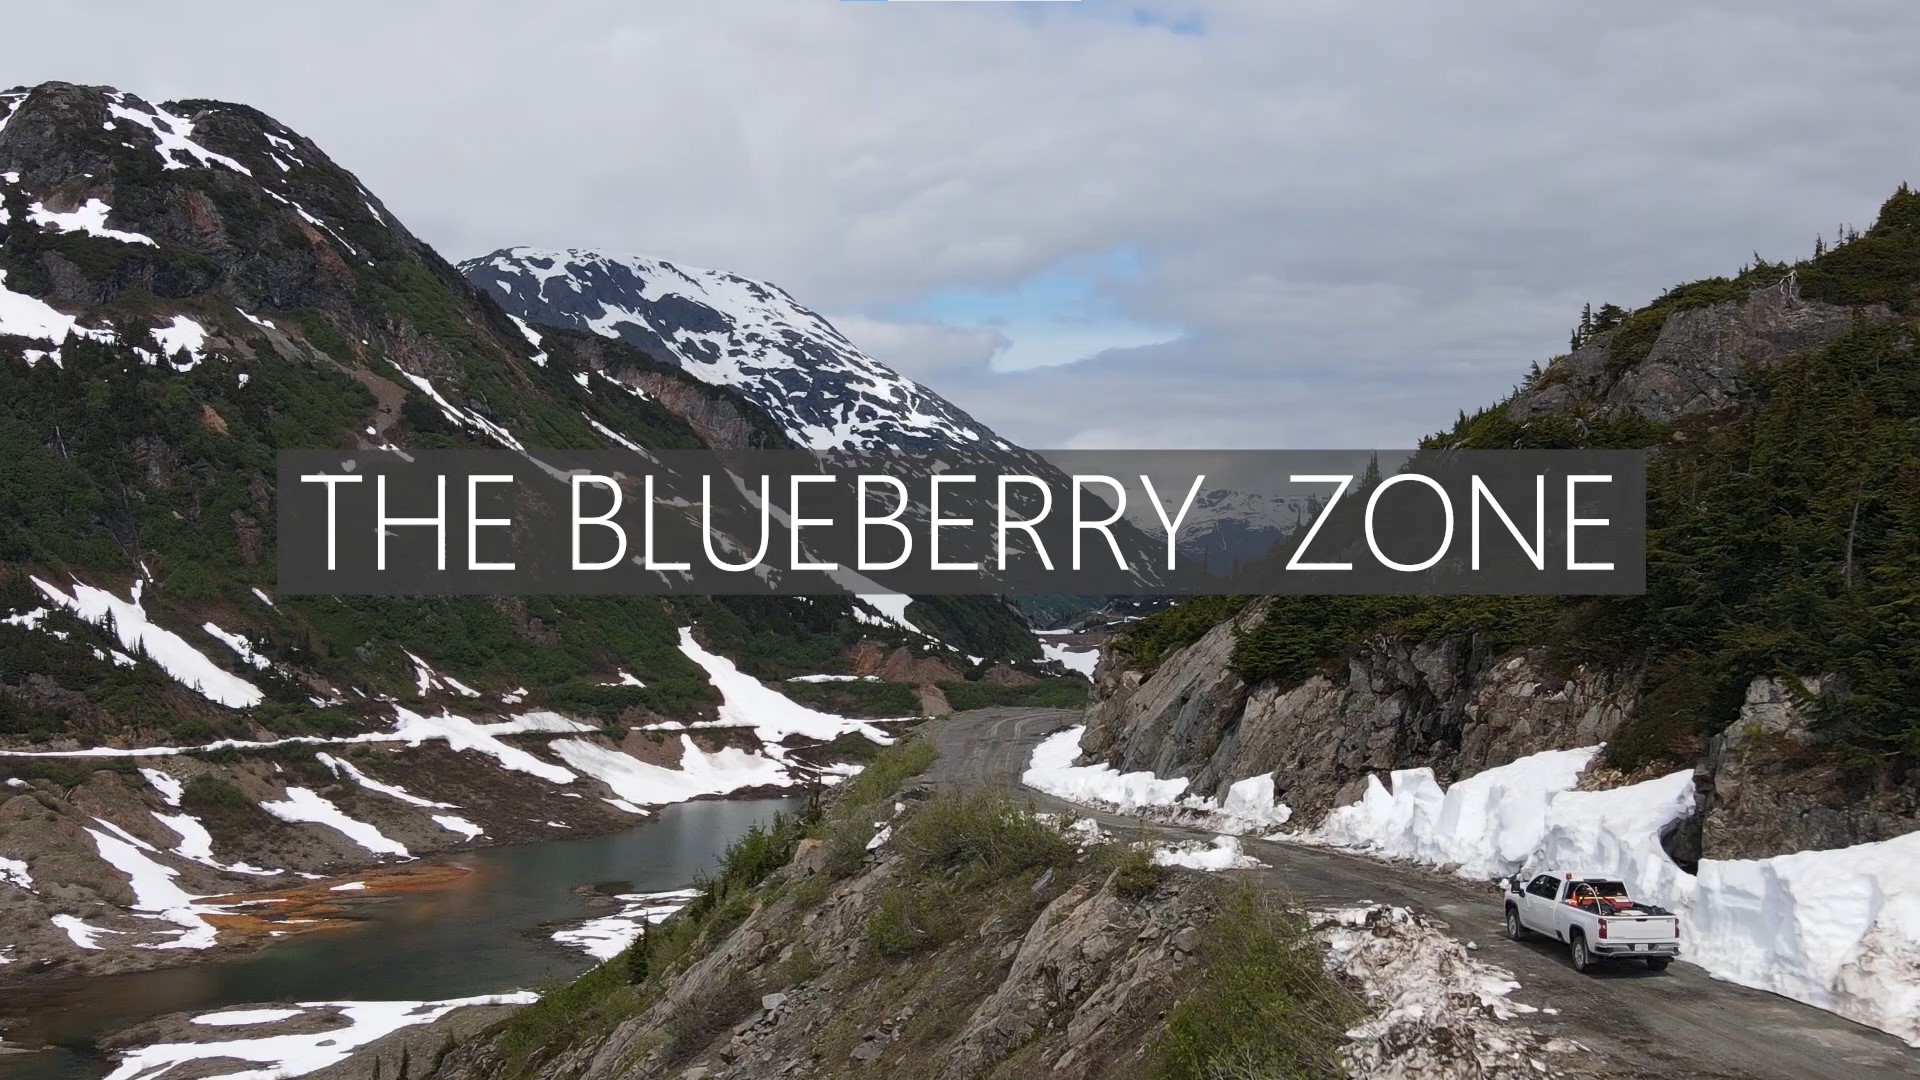 News Release | The Blueberry Zone | 02/17/2021